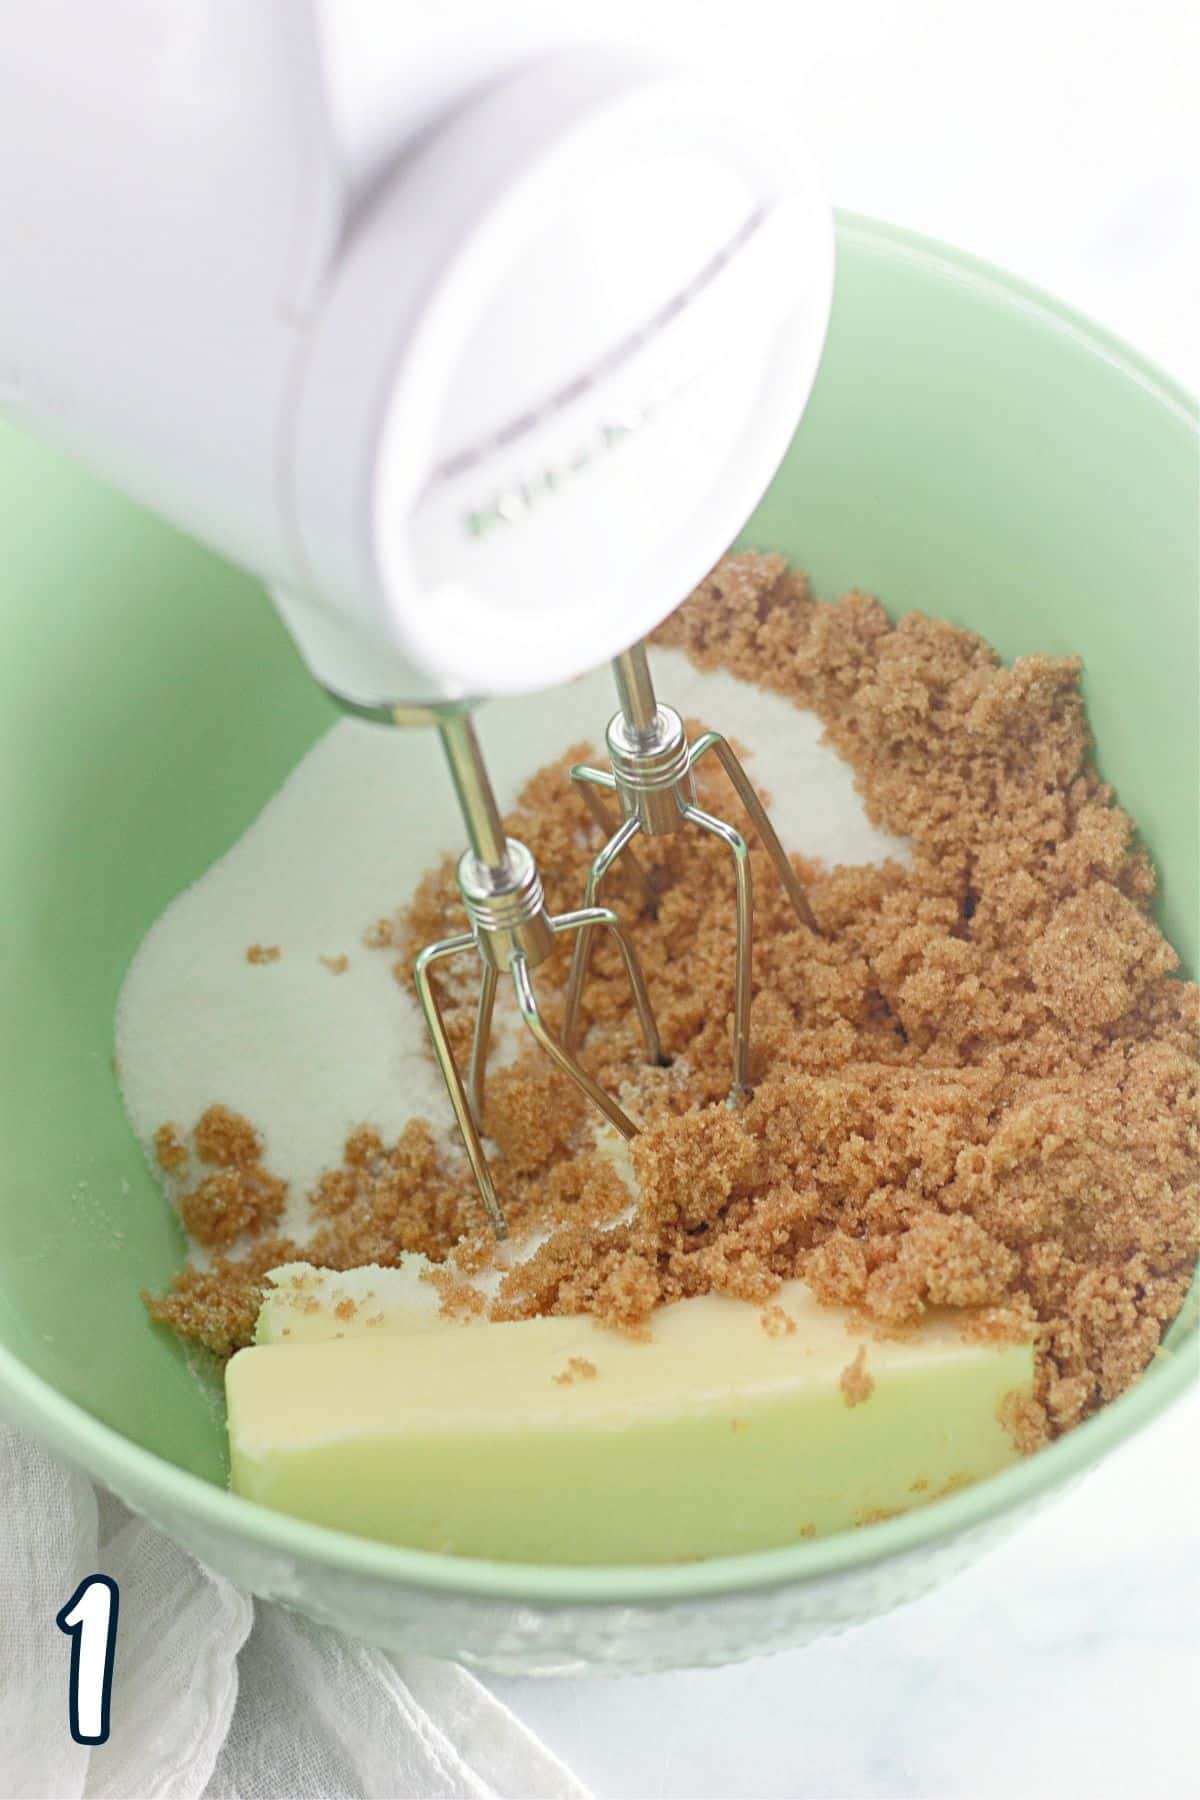 A mixer is being used to mix ingredients in a bowl.